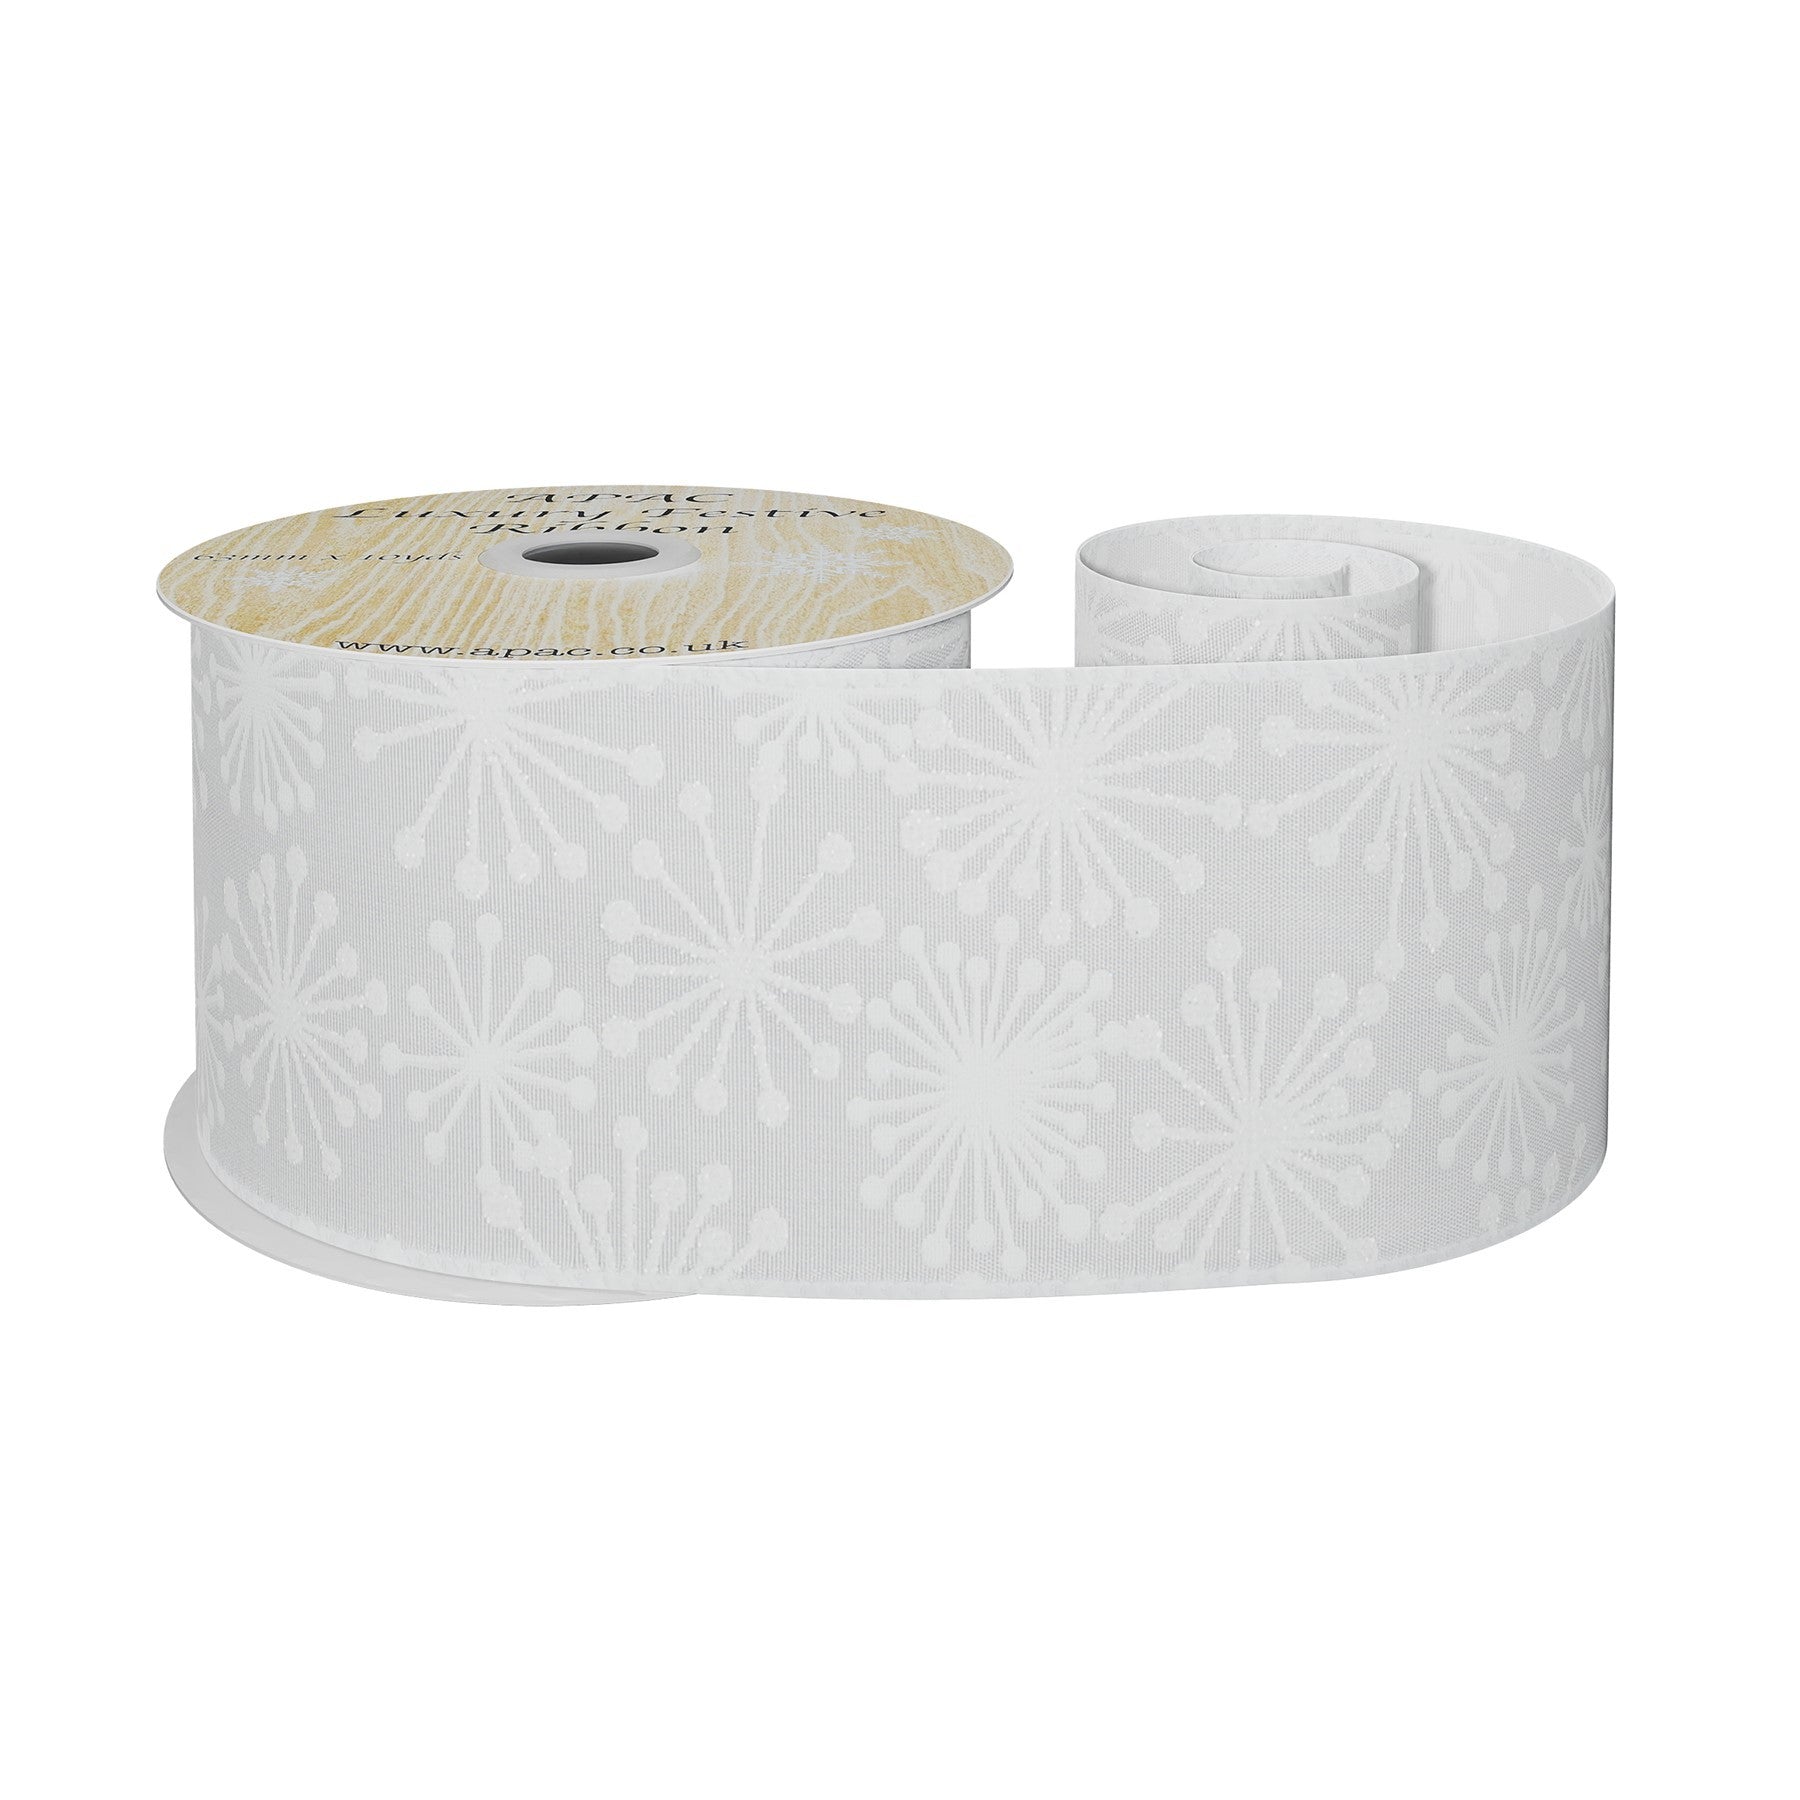 View White with White Glitter Snowflakes Ribbon 63mm x 10yds information